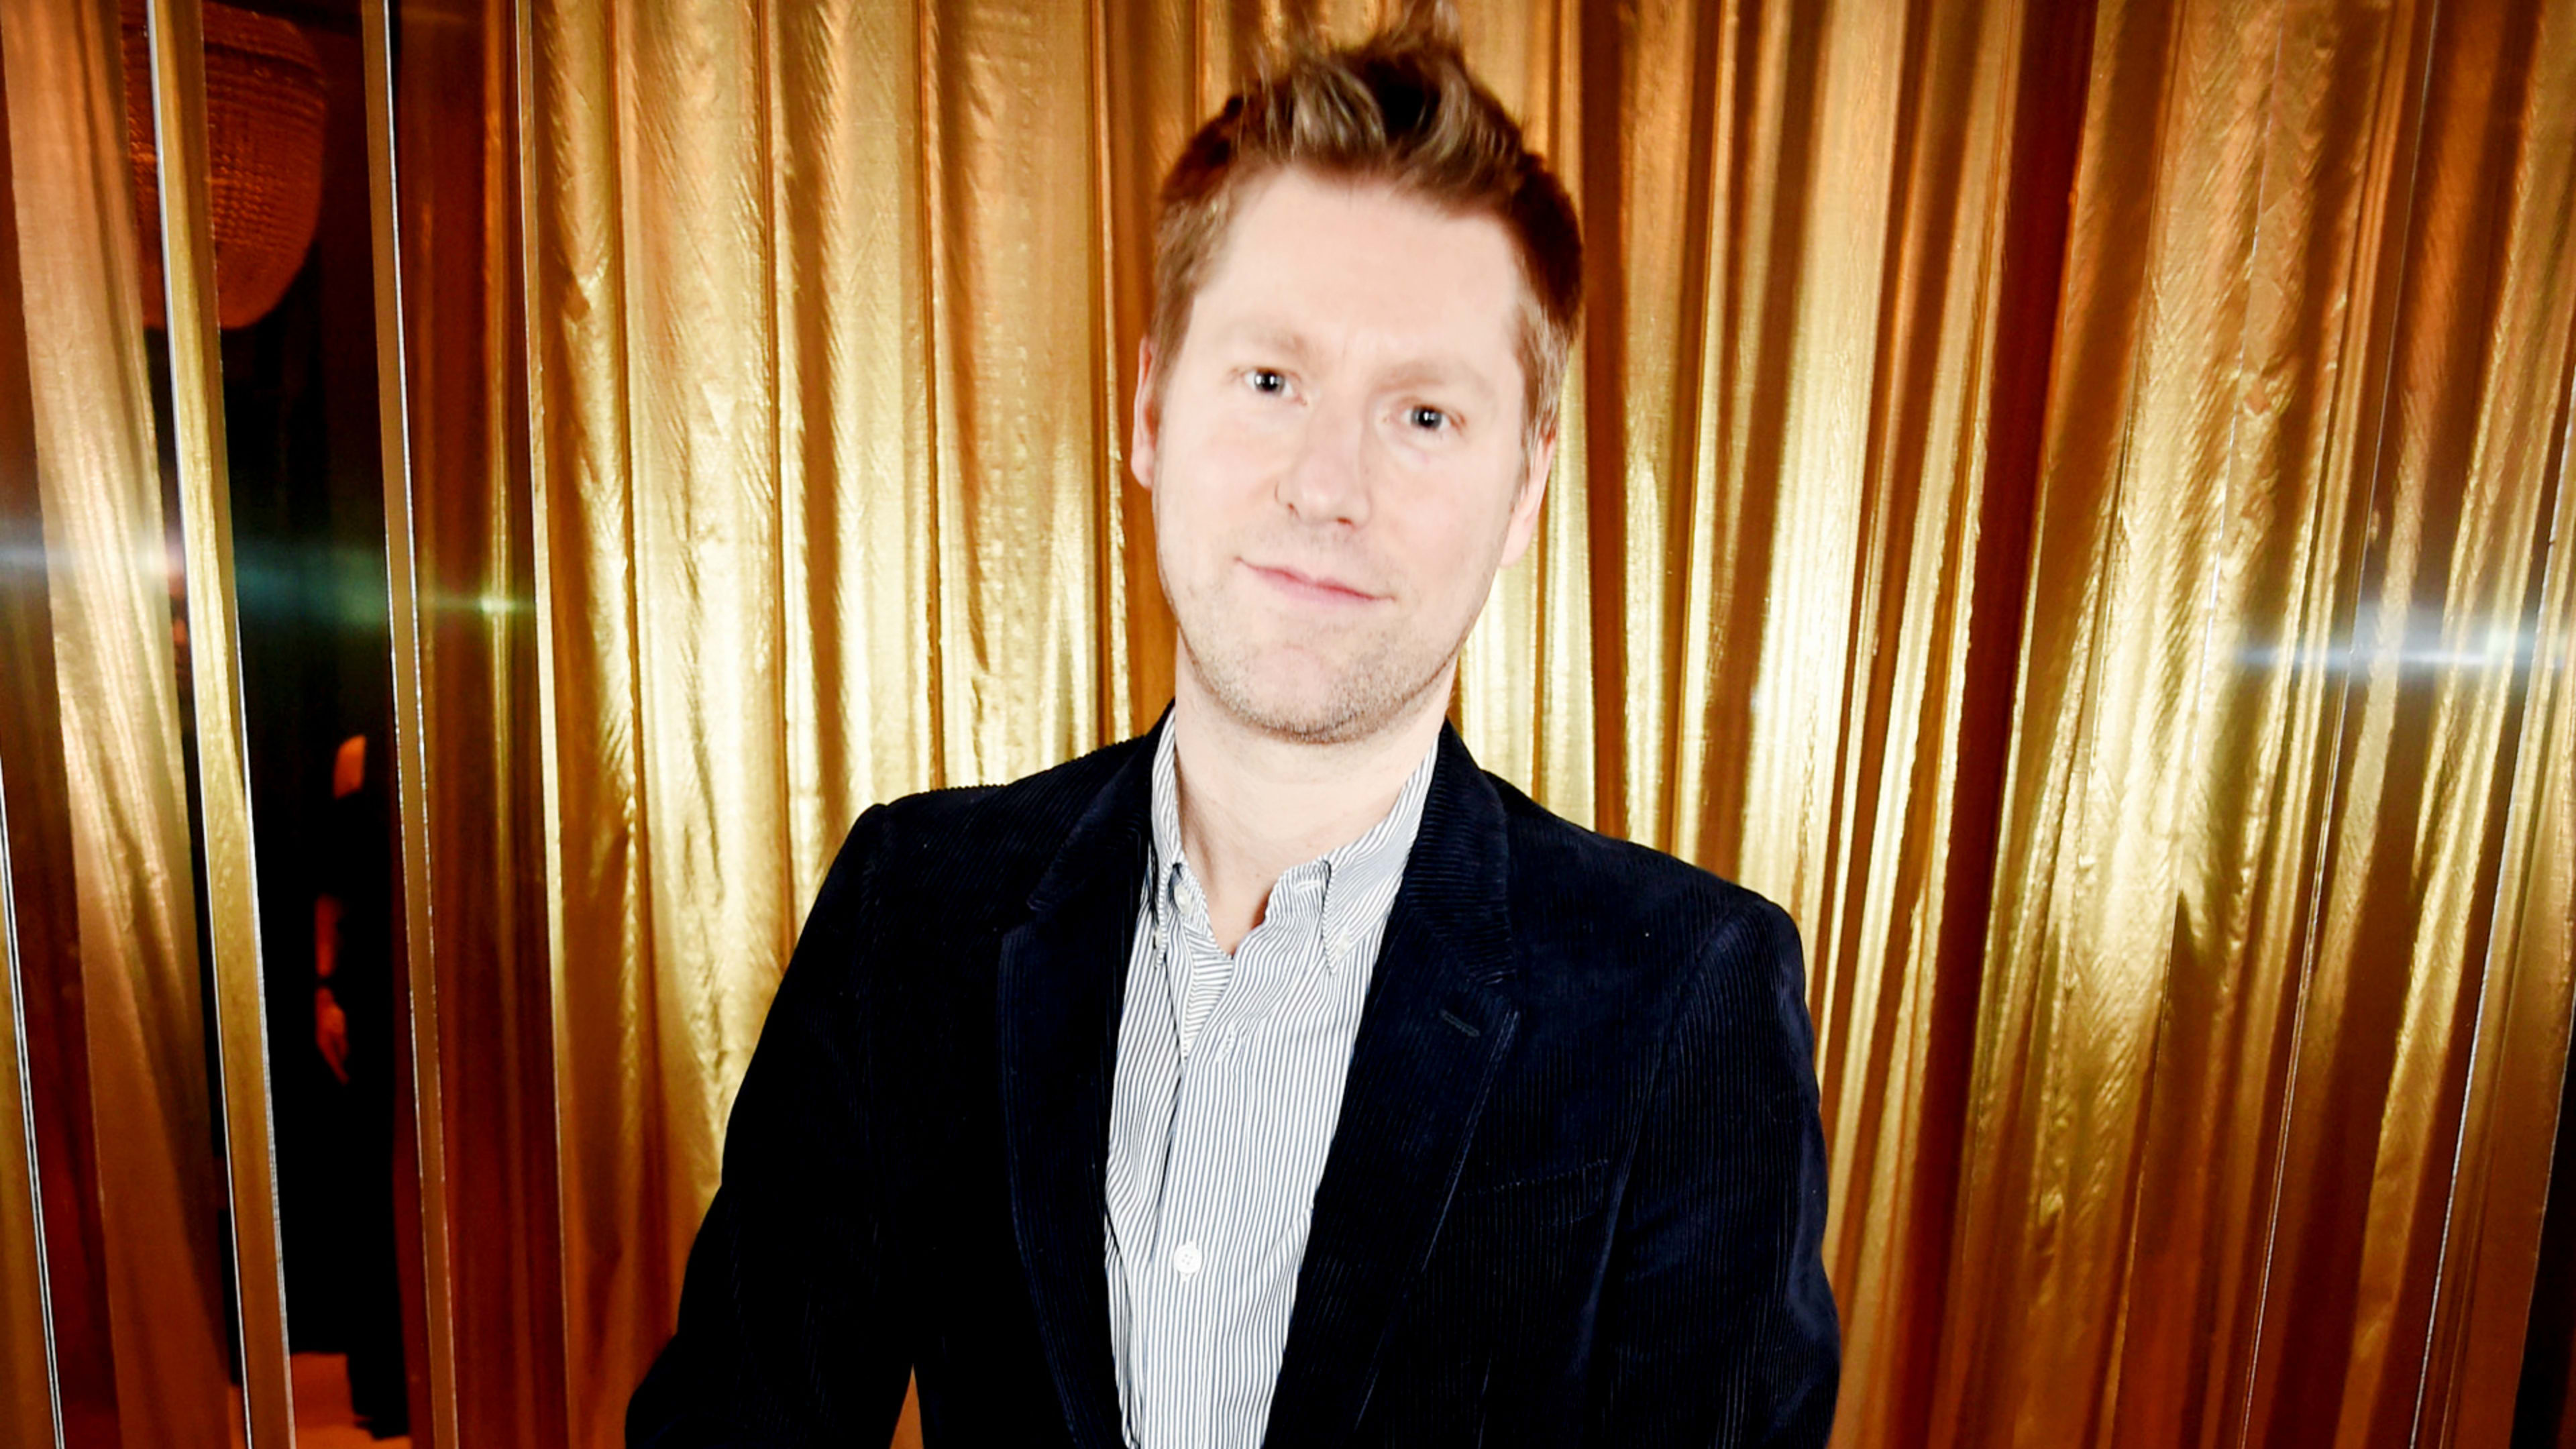 Burberry’s Christopher Bailey CEO experiment was bound to fail